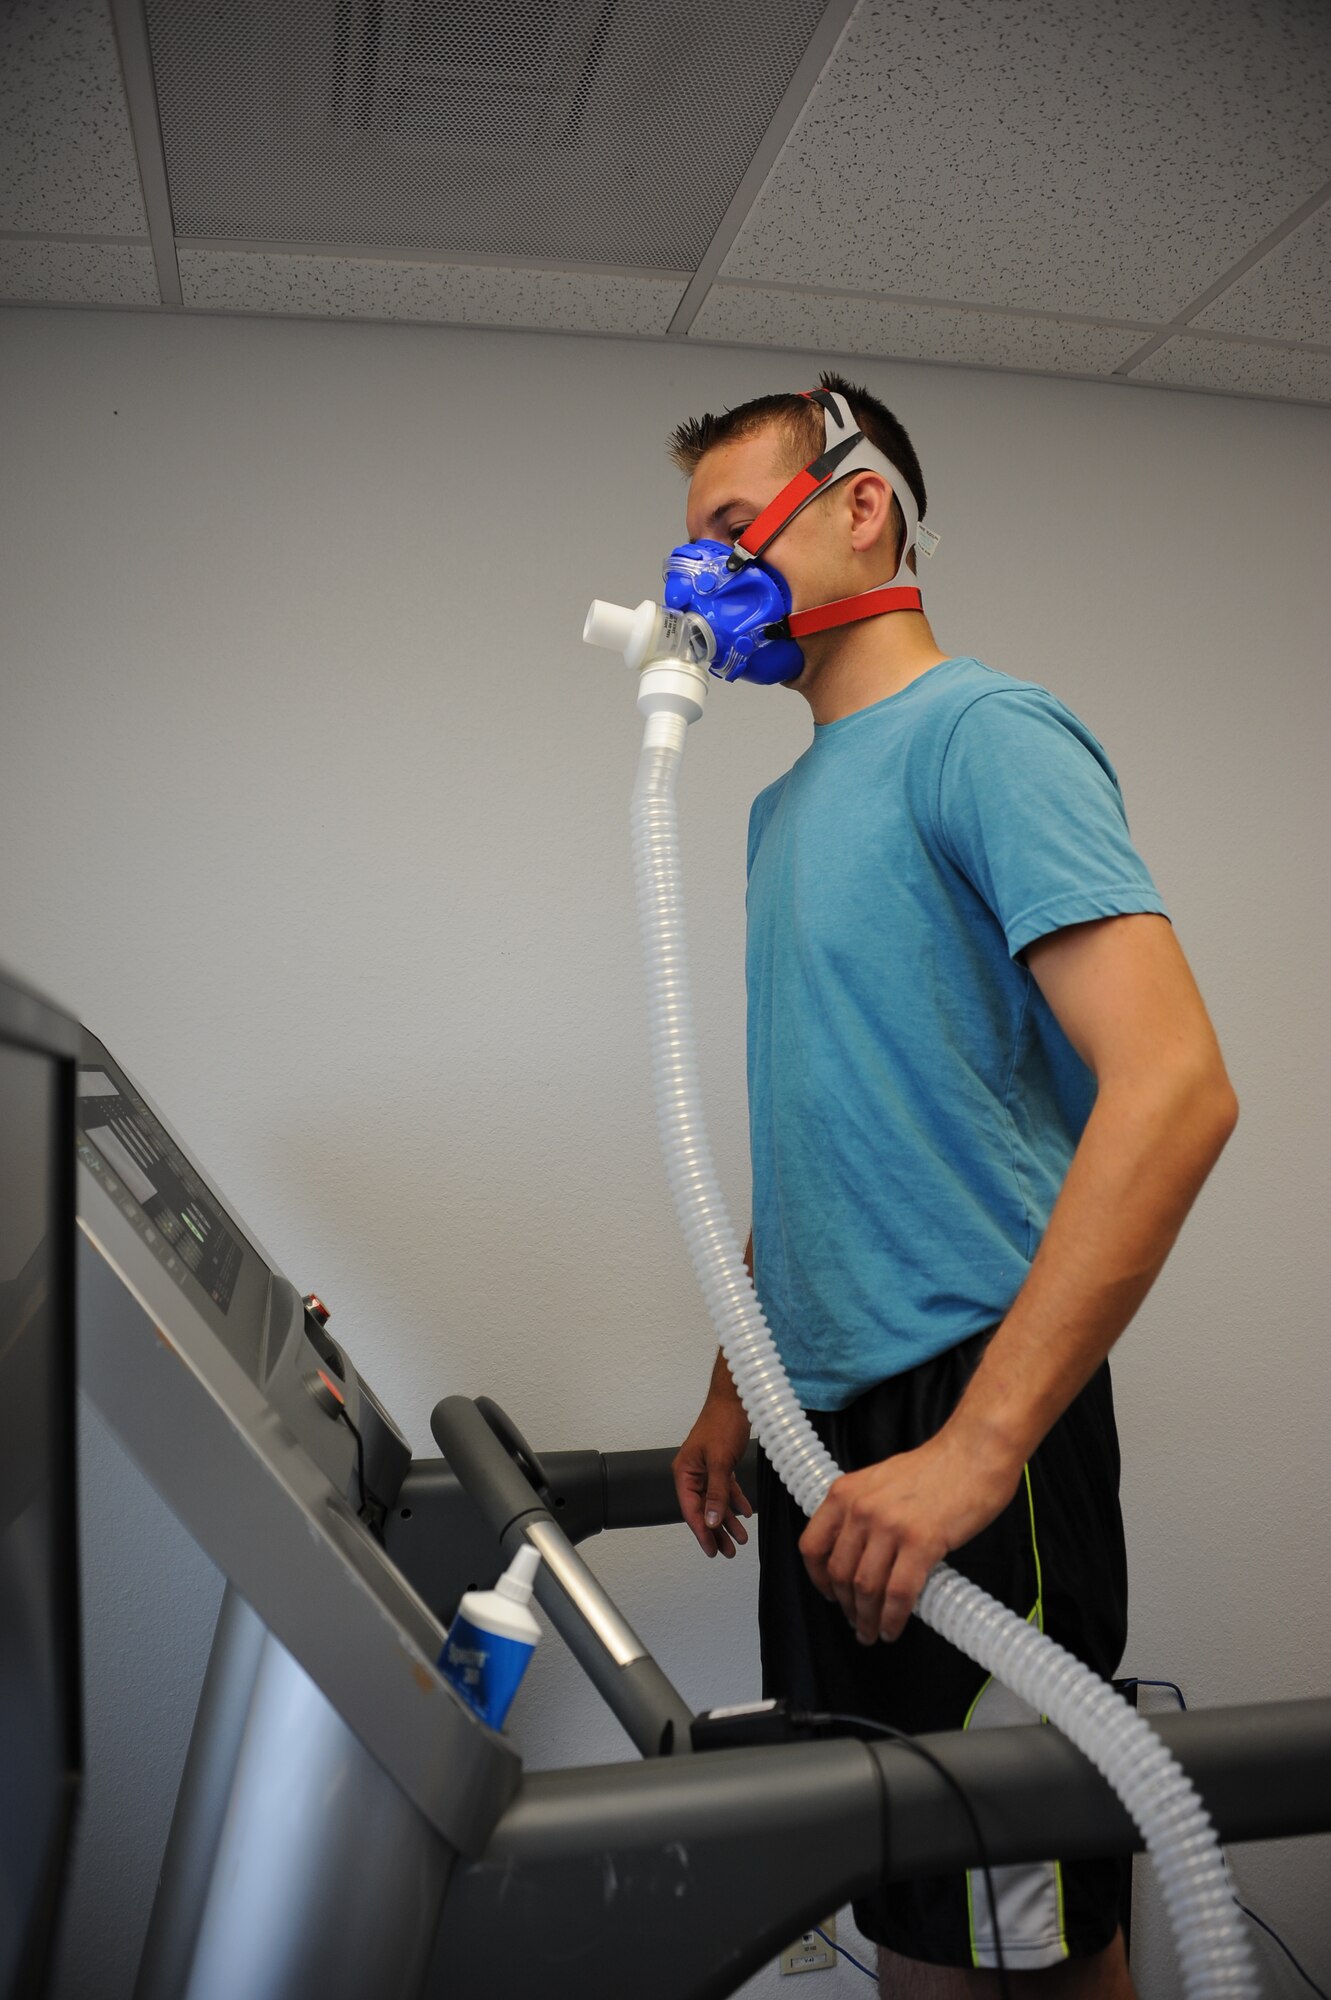 U.S. Air Force Senior Airman Yevgeniy Sokolov, 355th Aircraft Maintenance Squadron crew chief, stands on a treadmill in preparation to start a VO2 max test at the Health and Wellness Center at Davis-Monthan Air Force Base, Ariz., Sept. 2, 2015. The VO2 max measures the maximum amount of oxygen the body is able to use during a period of intense exercise depending on the subject’s weight and the strength of their lungs. (U.S. Air Force photo by Airman 1st Class Ashley N. Steffen/Released)